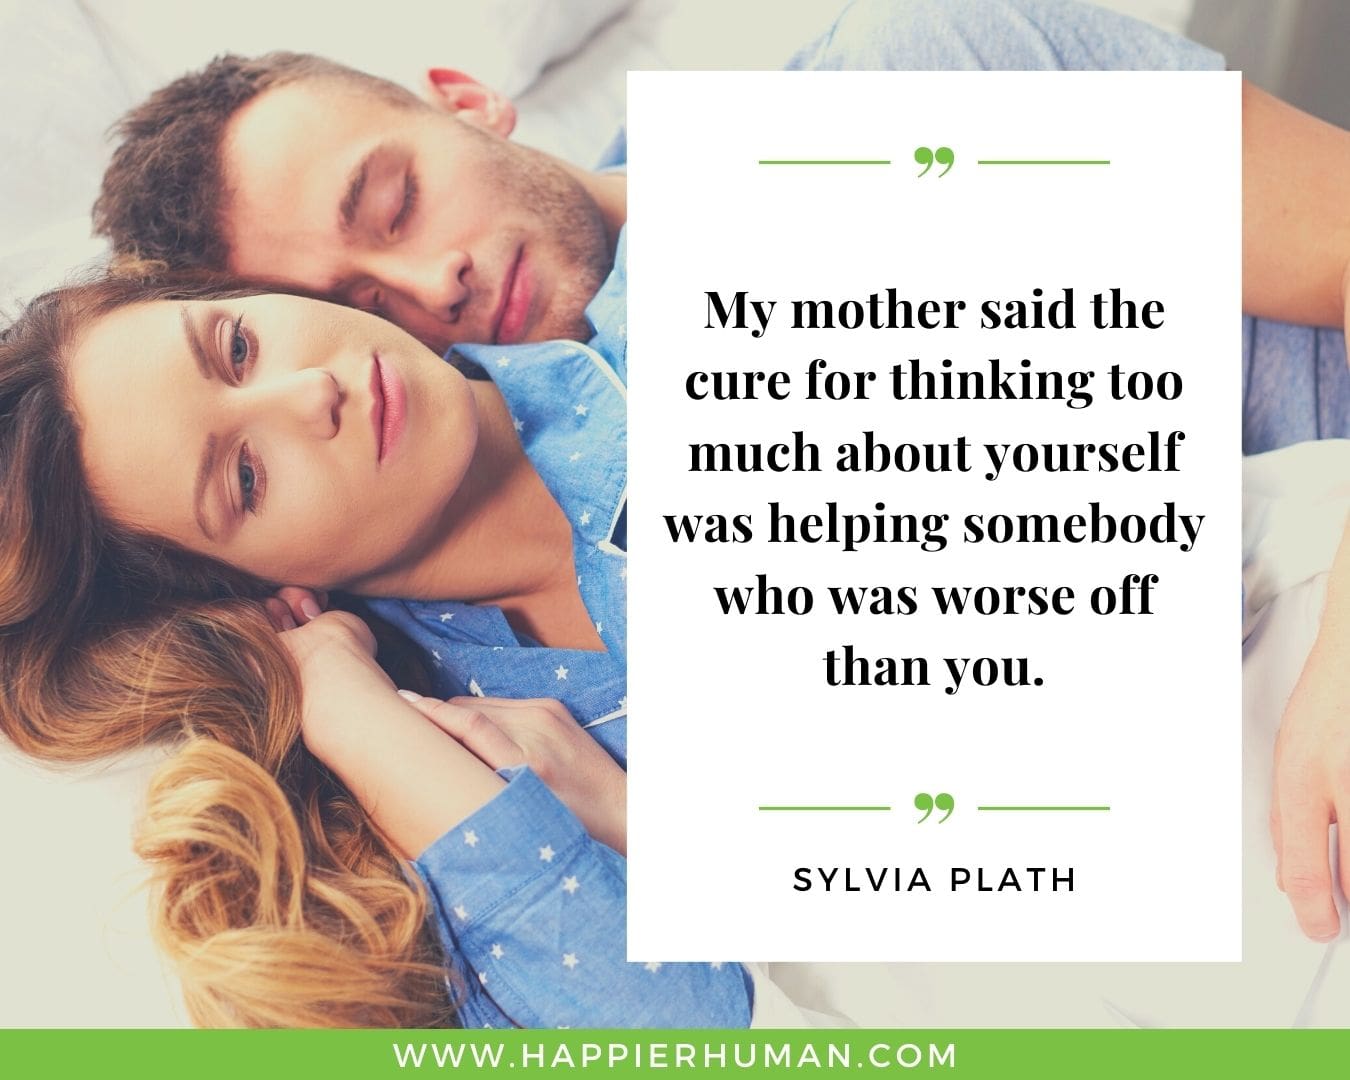 Overthinking Quotes - “My mother said the cure for thinking too much about yourself was helping somebody who was worse off than you.” - Sylvia Plath